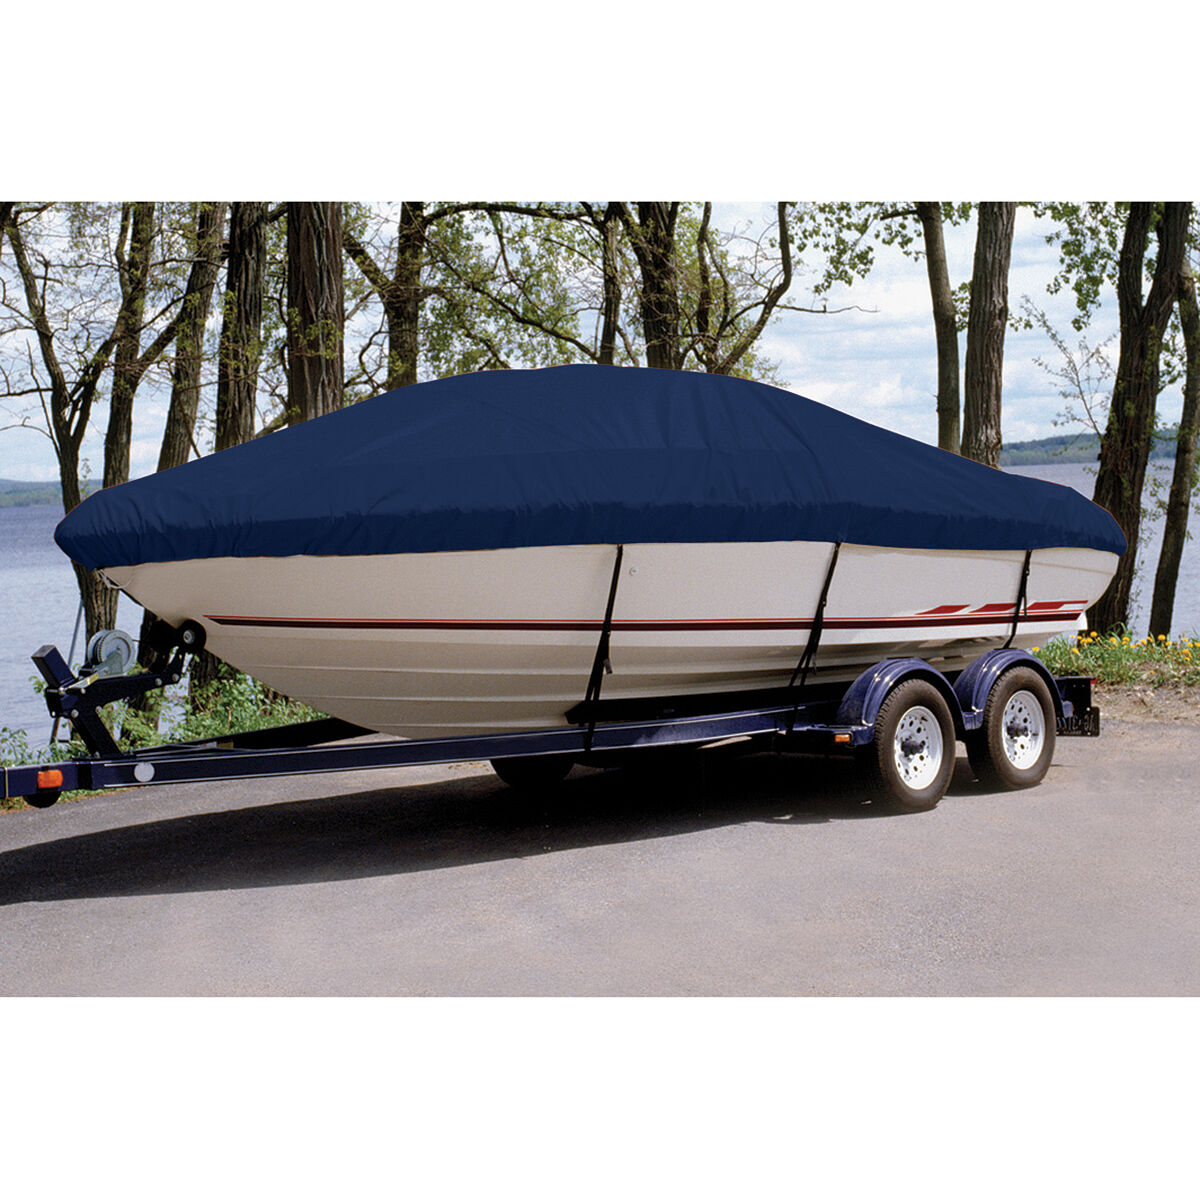 Taylor Made Trailerite Ultima Cover for 98-01 Sylvan 1500 Explorer SC O/B Boat Cover in Navy Blue Polyester